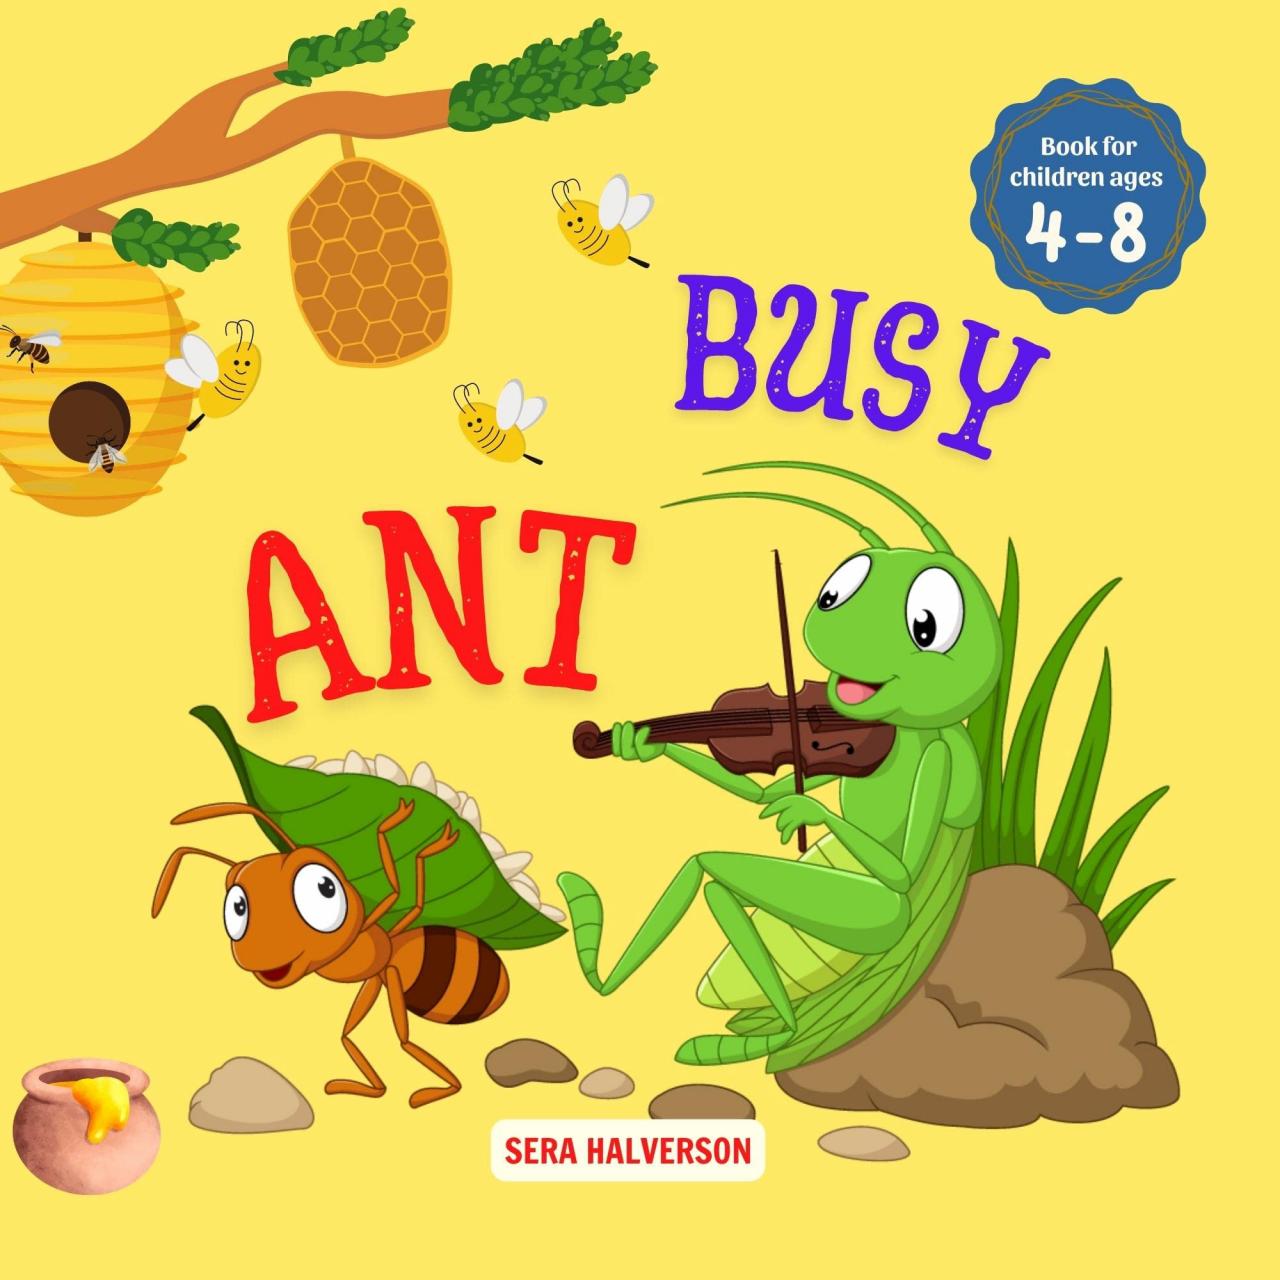 As busy as an ant